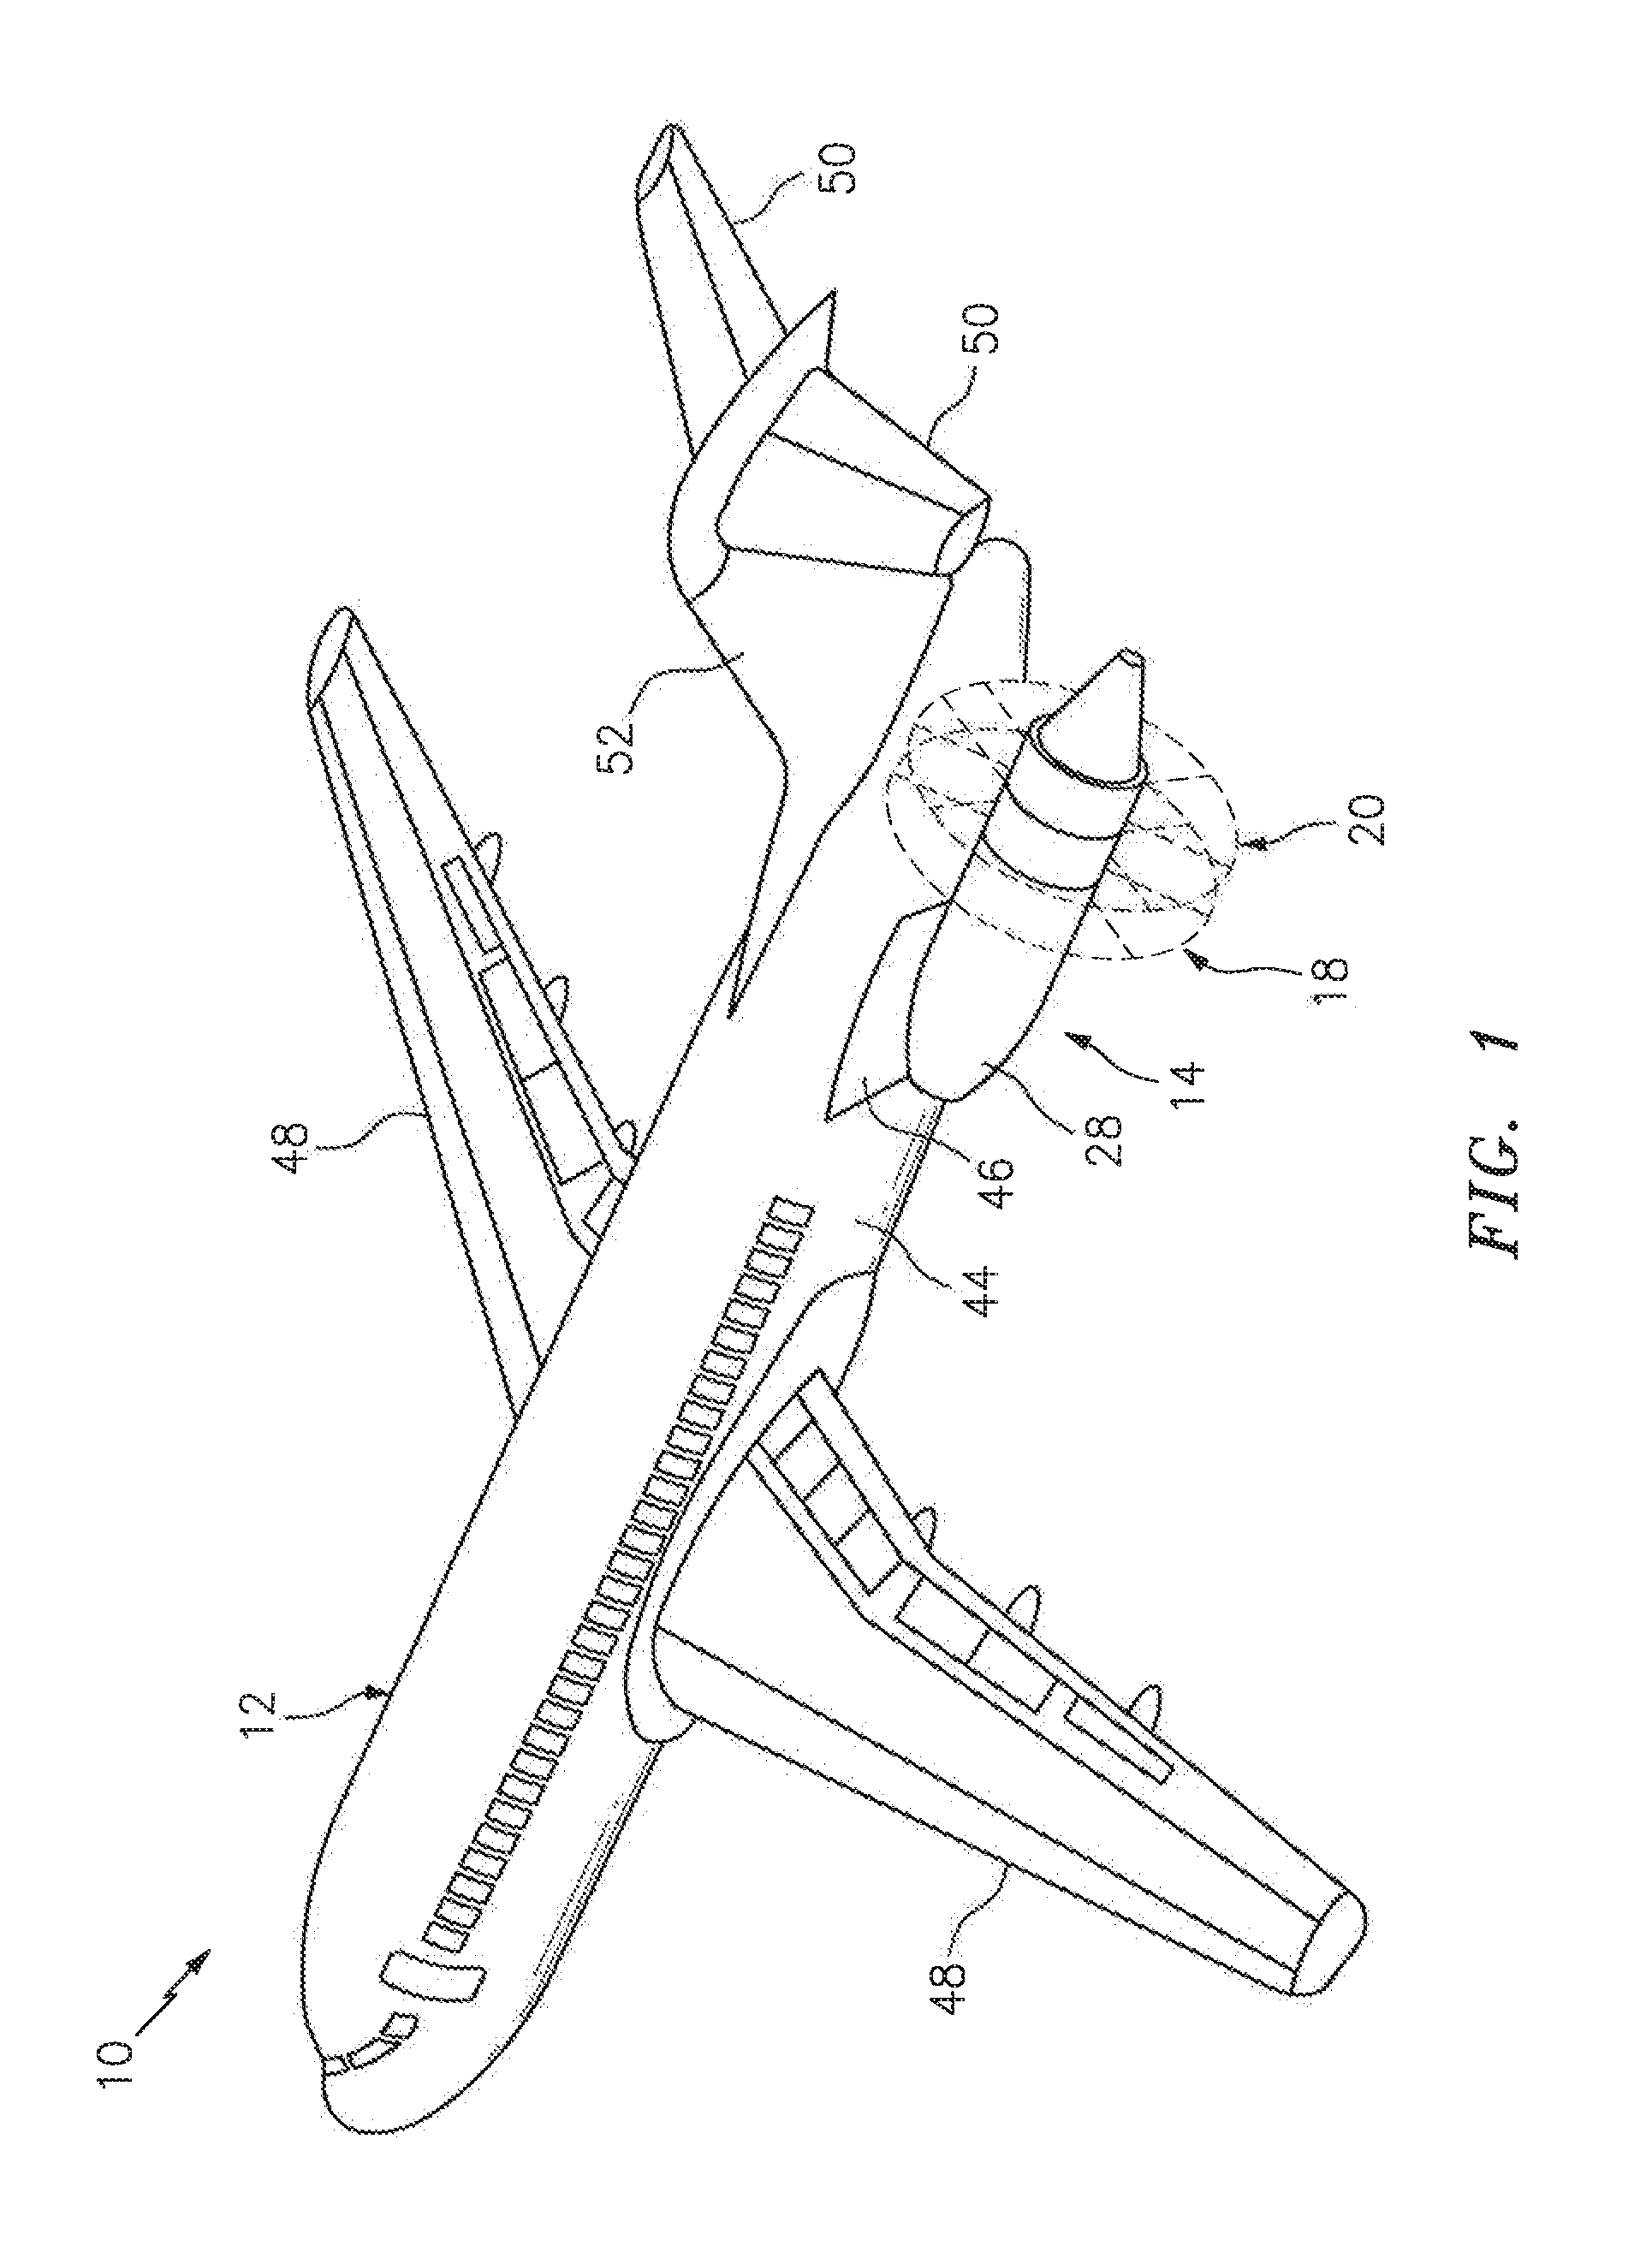 Noise attenuation for an open rotor aircraft propulsion system